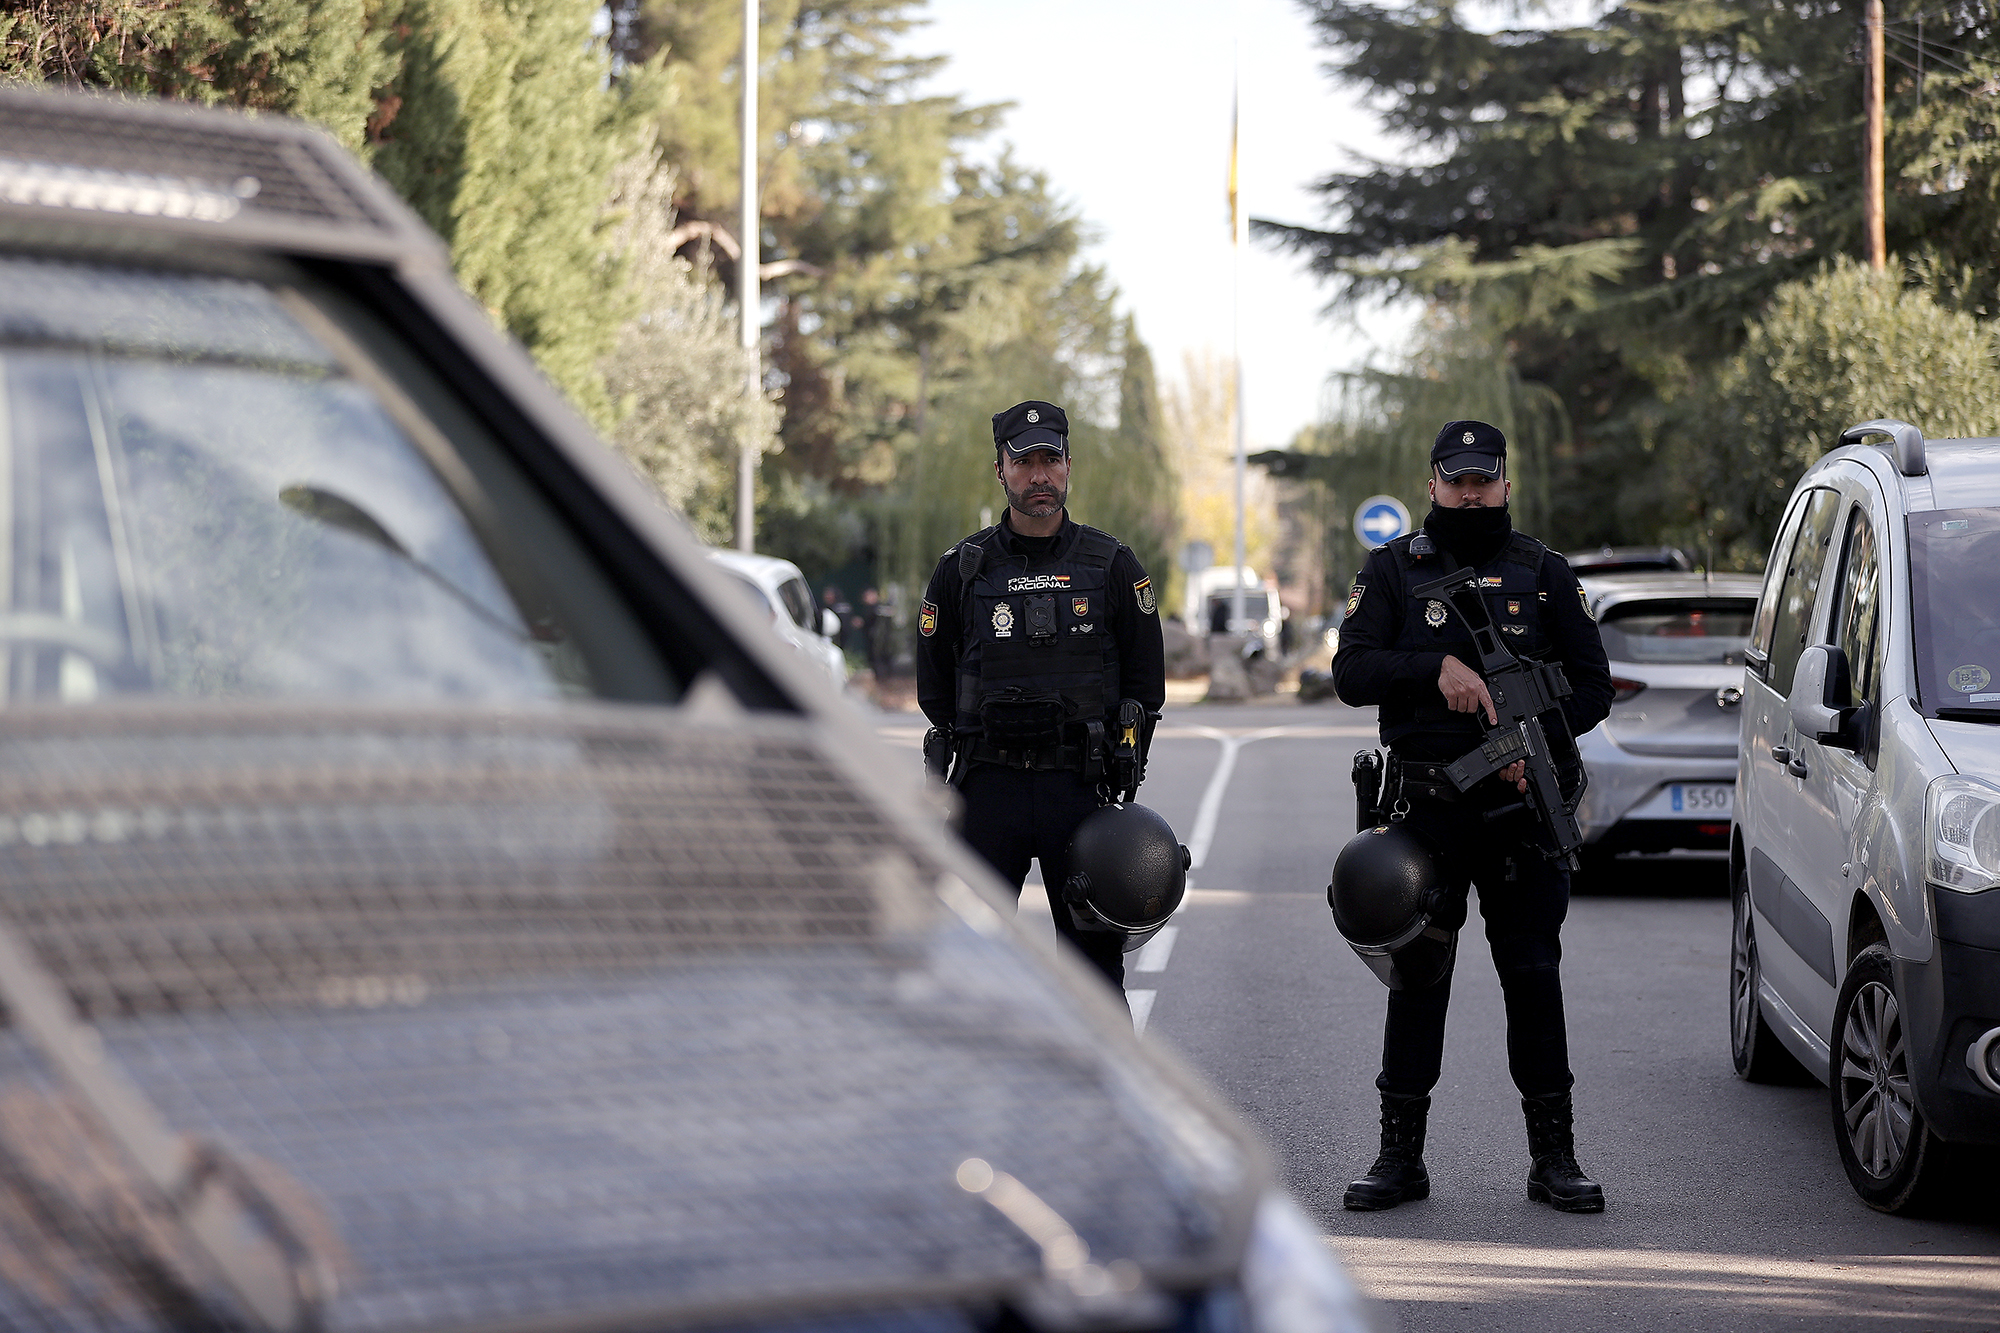 Police take security measures around the Ukrainian embassy in Madrid, Spain, following an explosion when embassy staff opened an envelope on November 30, 2022.